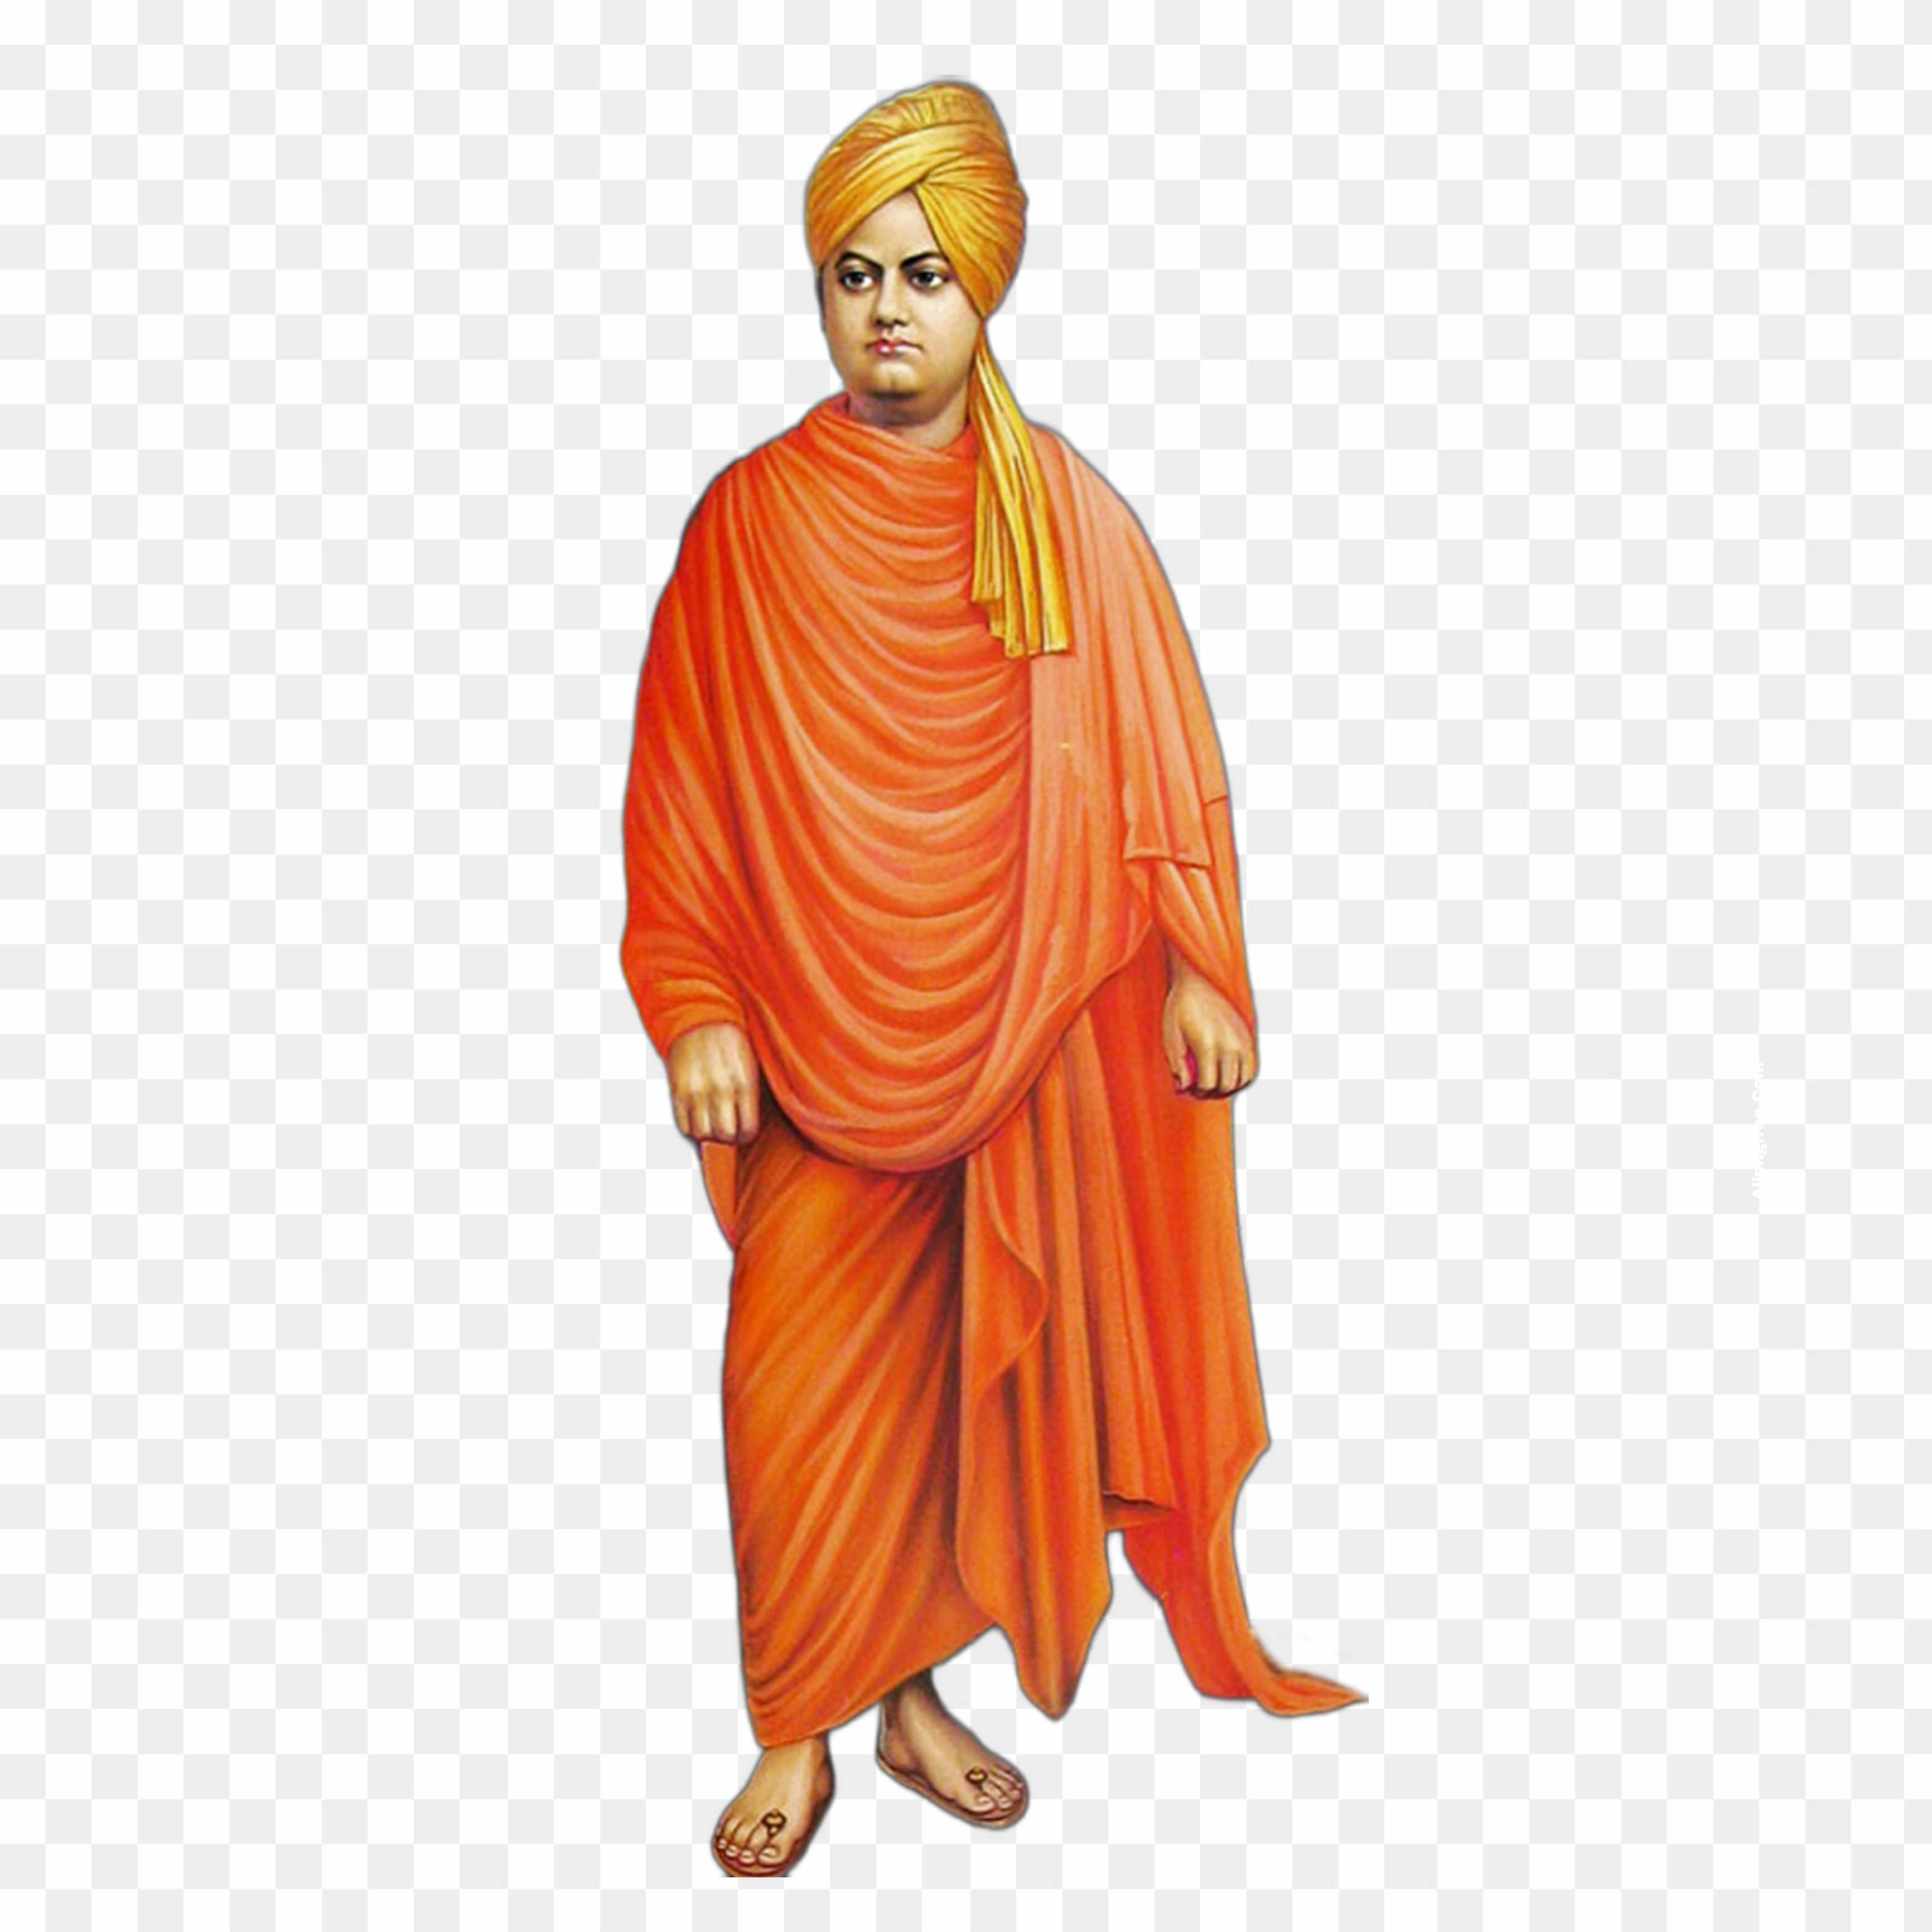 Swami Vivekanand full HD photo PNG images